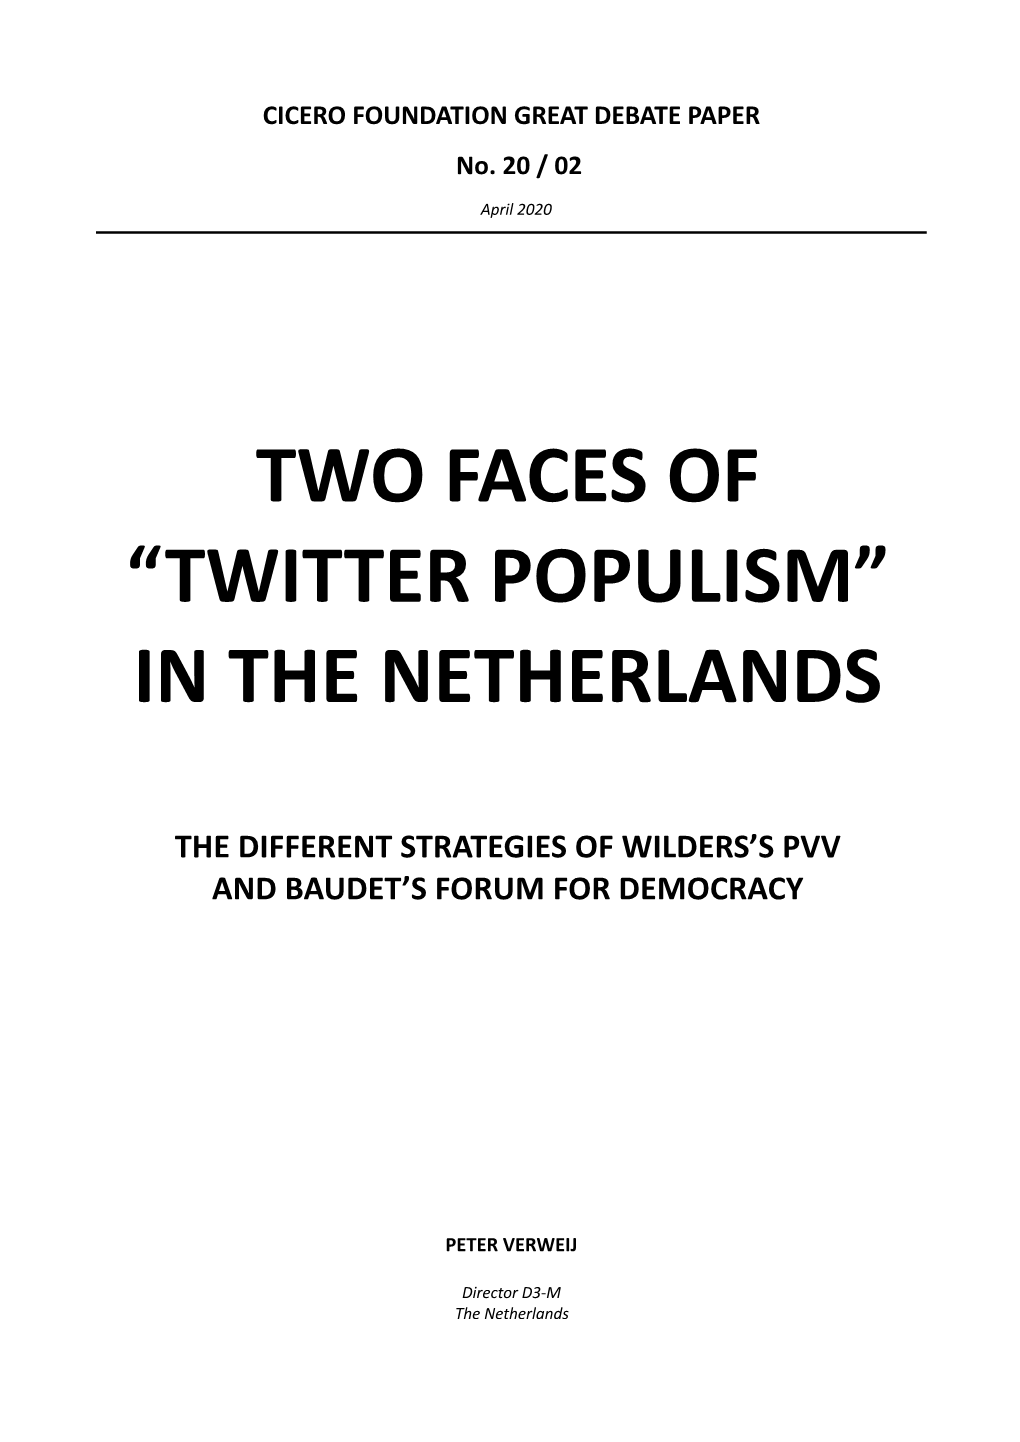 Twitter Populism” in the Netherlands